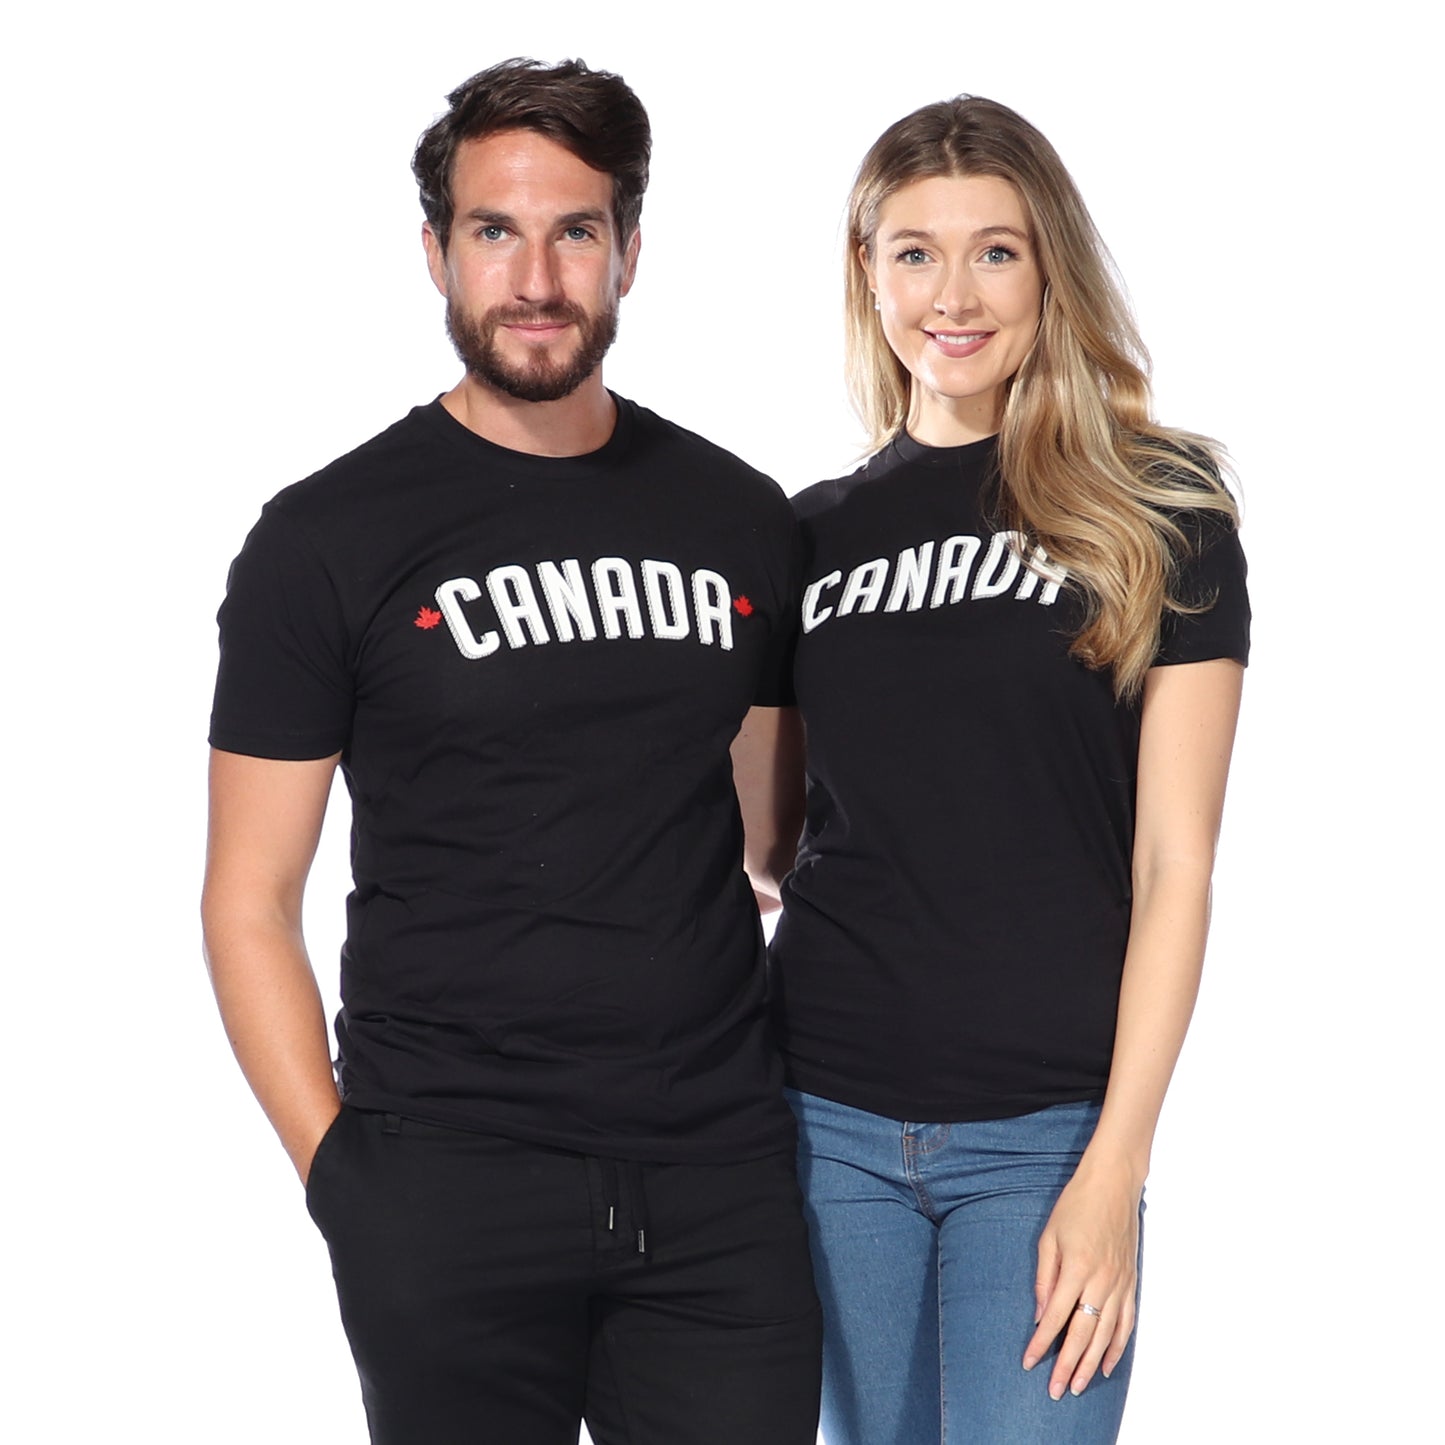 Discontinued Sale Tee: Canada Text (Black)